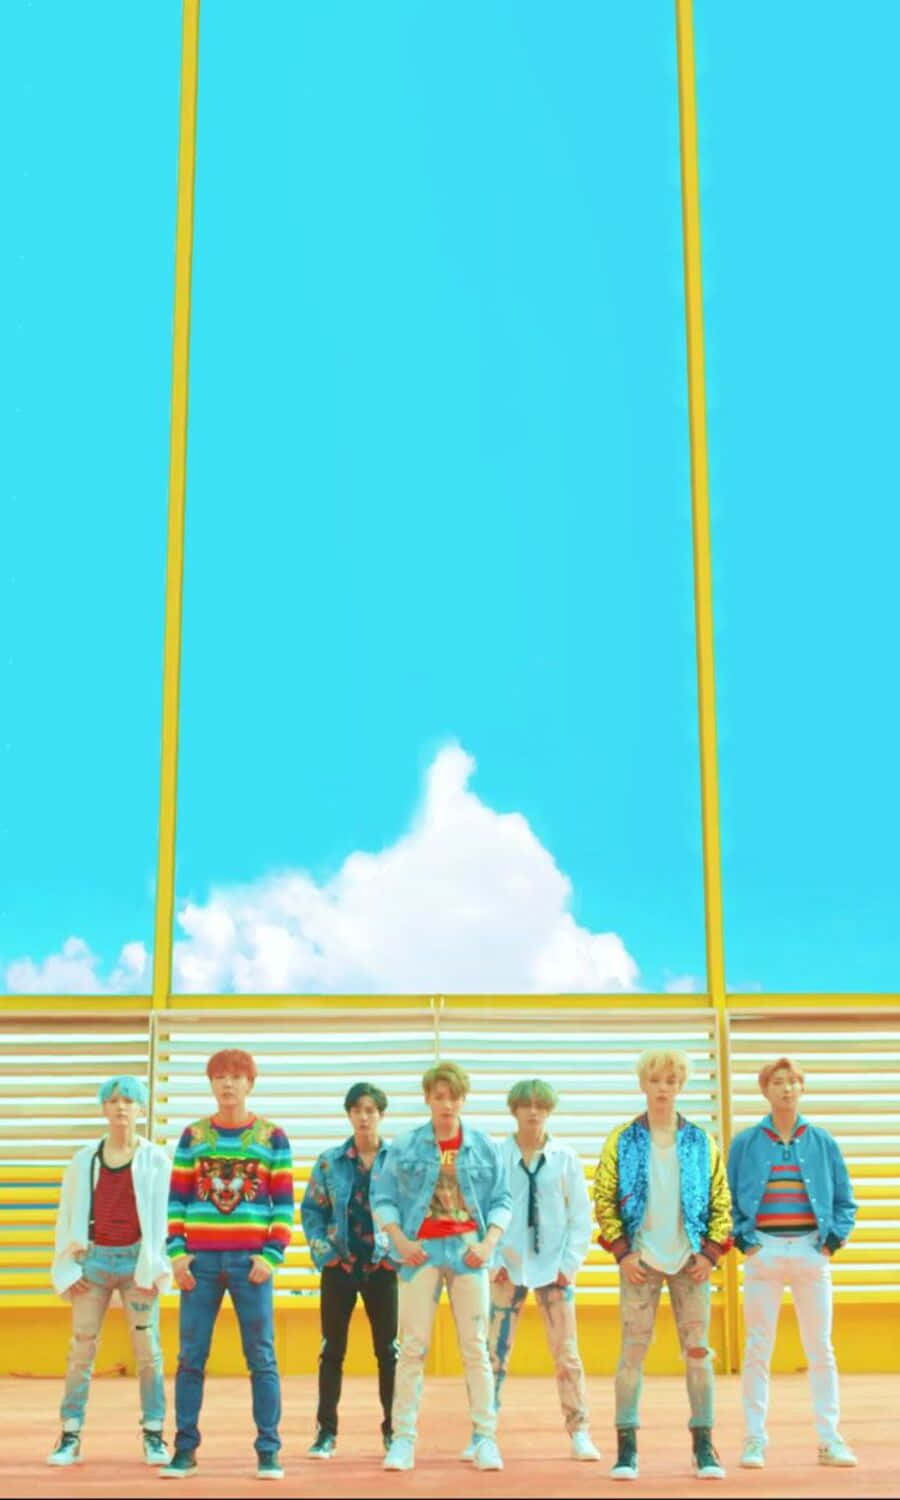 BTS in their captivating music video performance Wallpaper